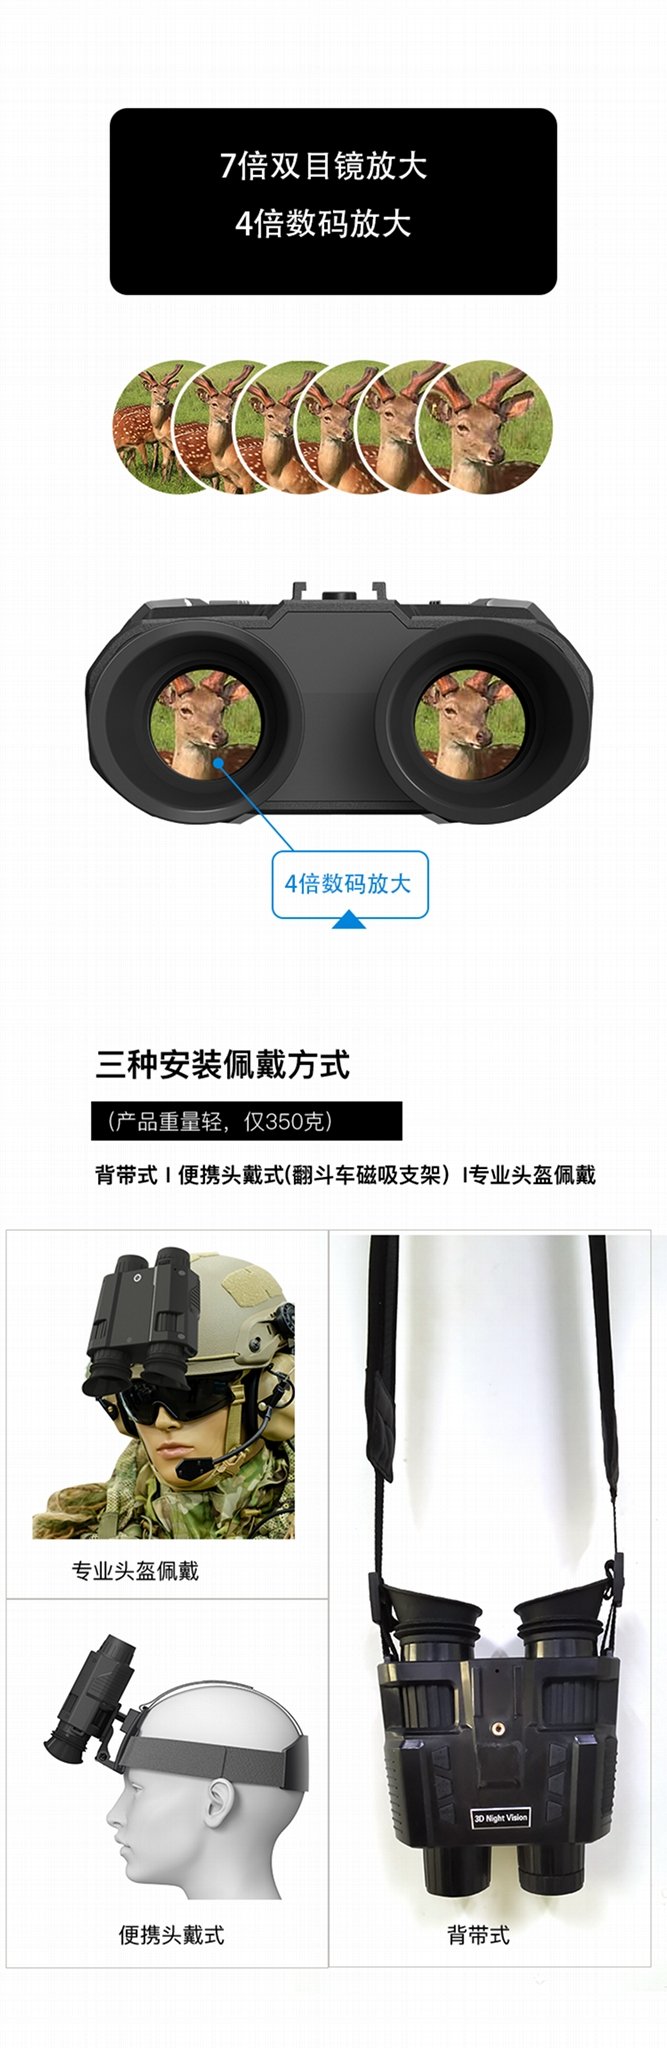 Dual-screen binocular infrared night vision device with helmet mount 9